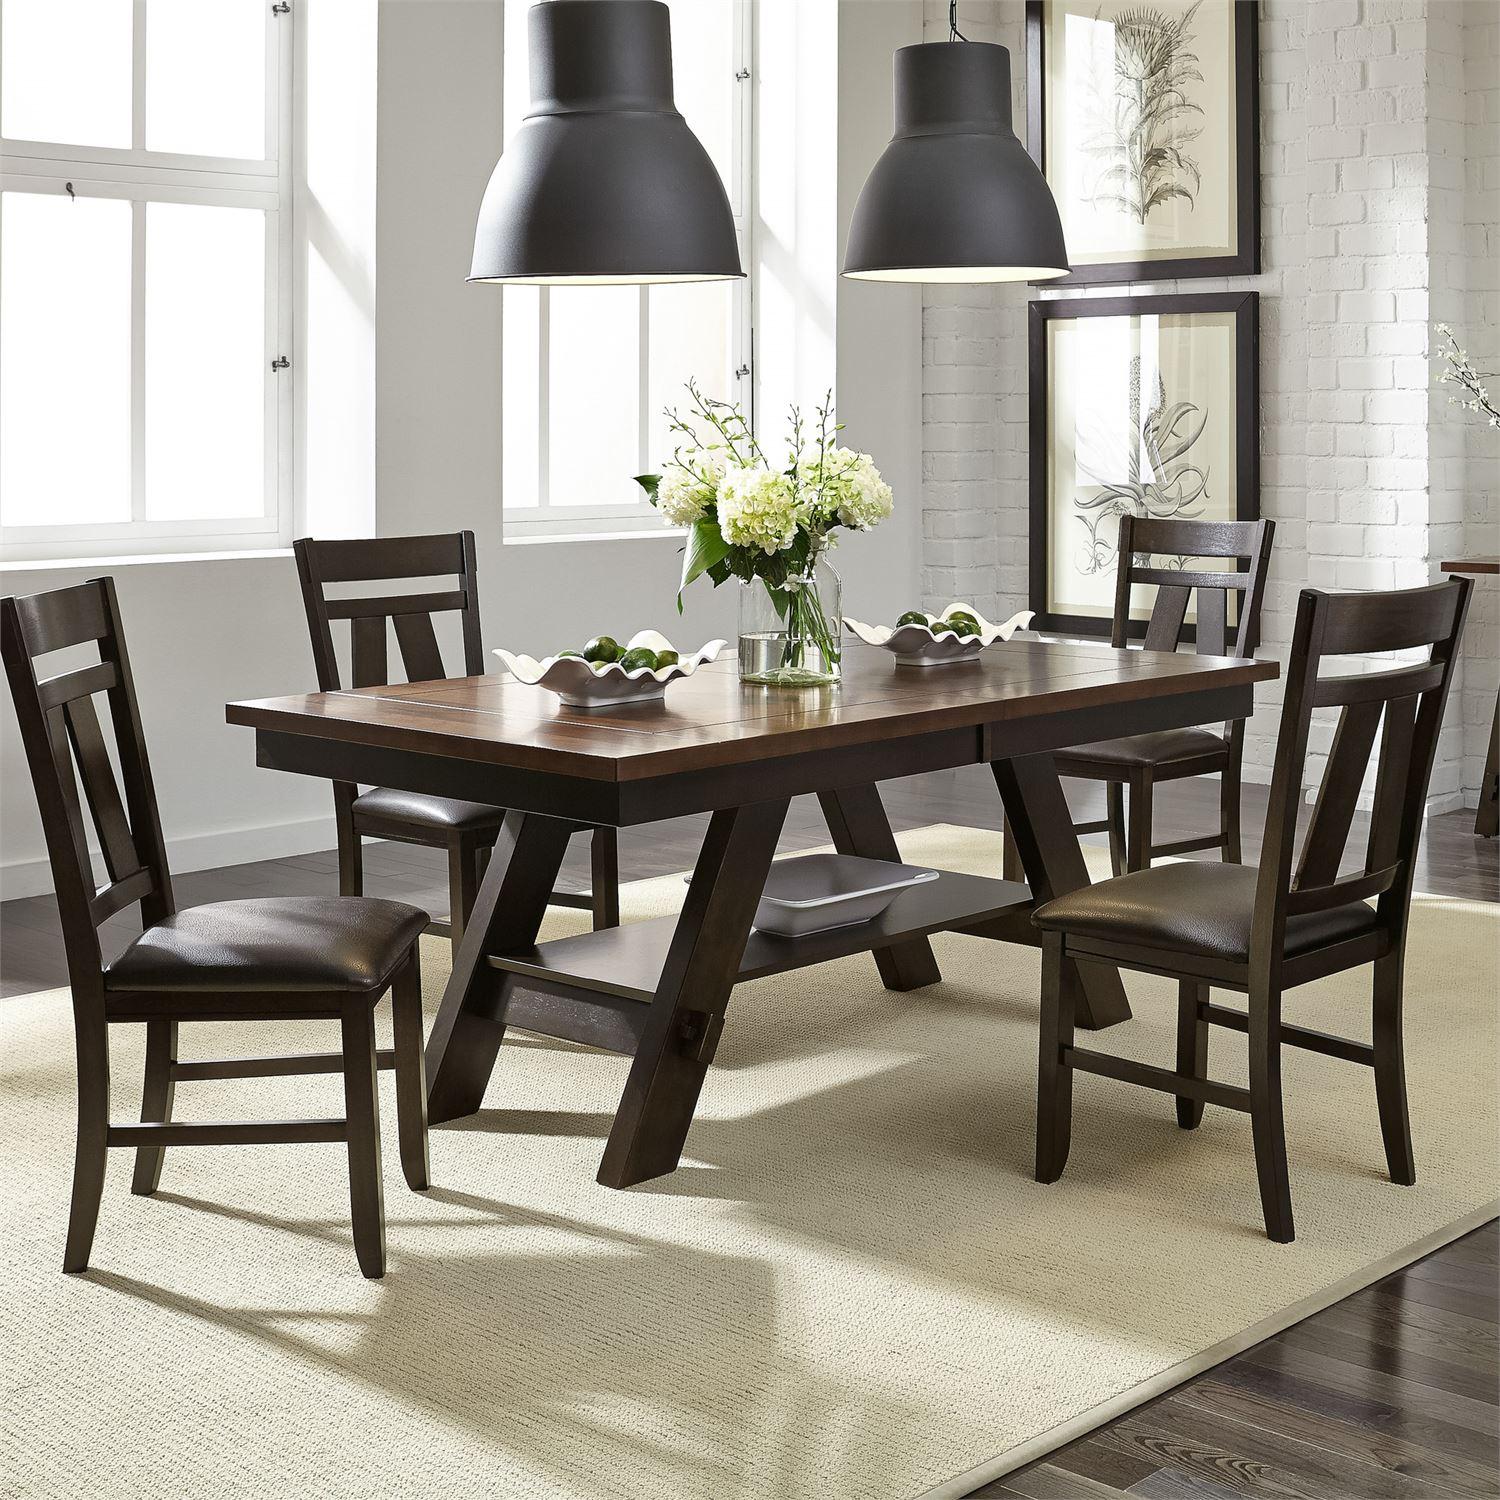 Transitional Dining Room Set Lawson  (116-CD) Dining Room Set 116-CD-5RLS in Espresso Lacquer